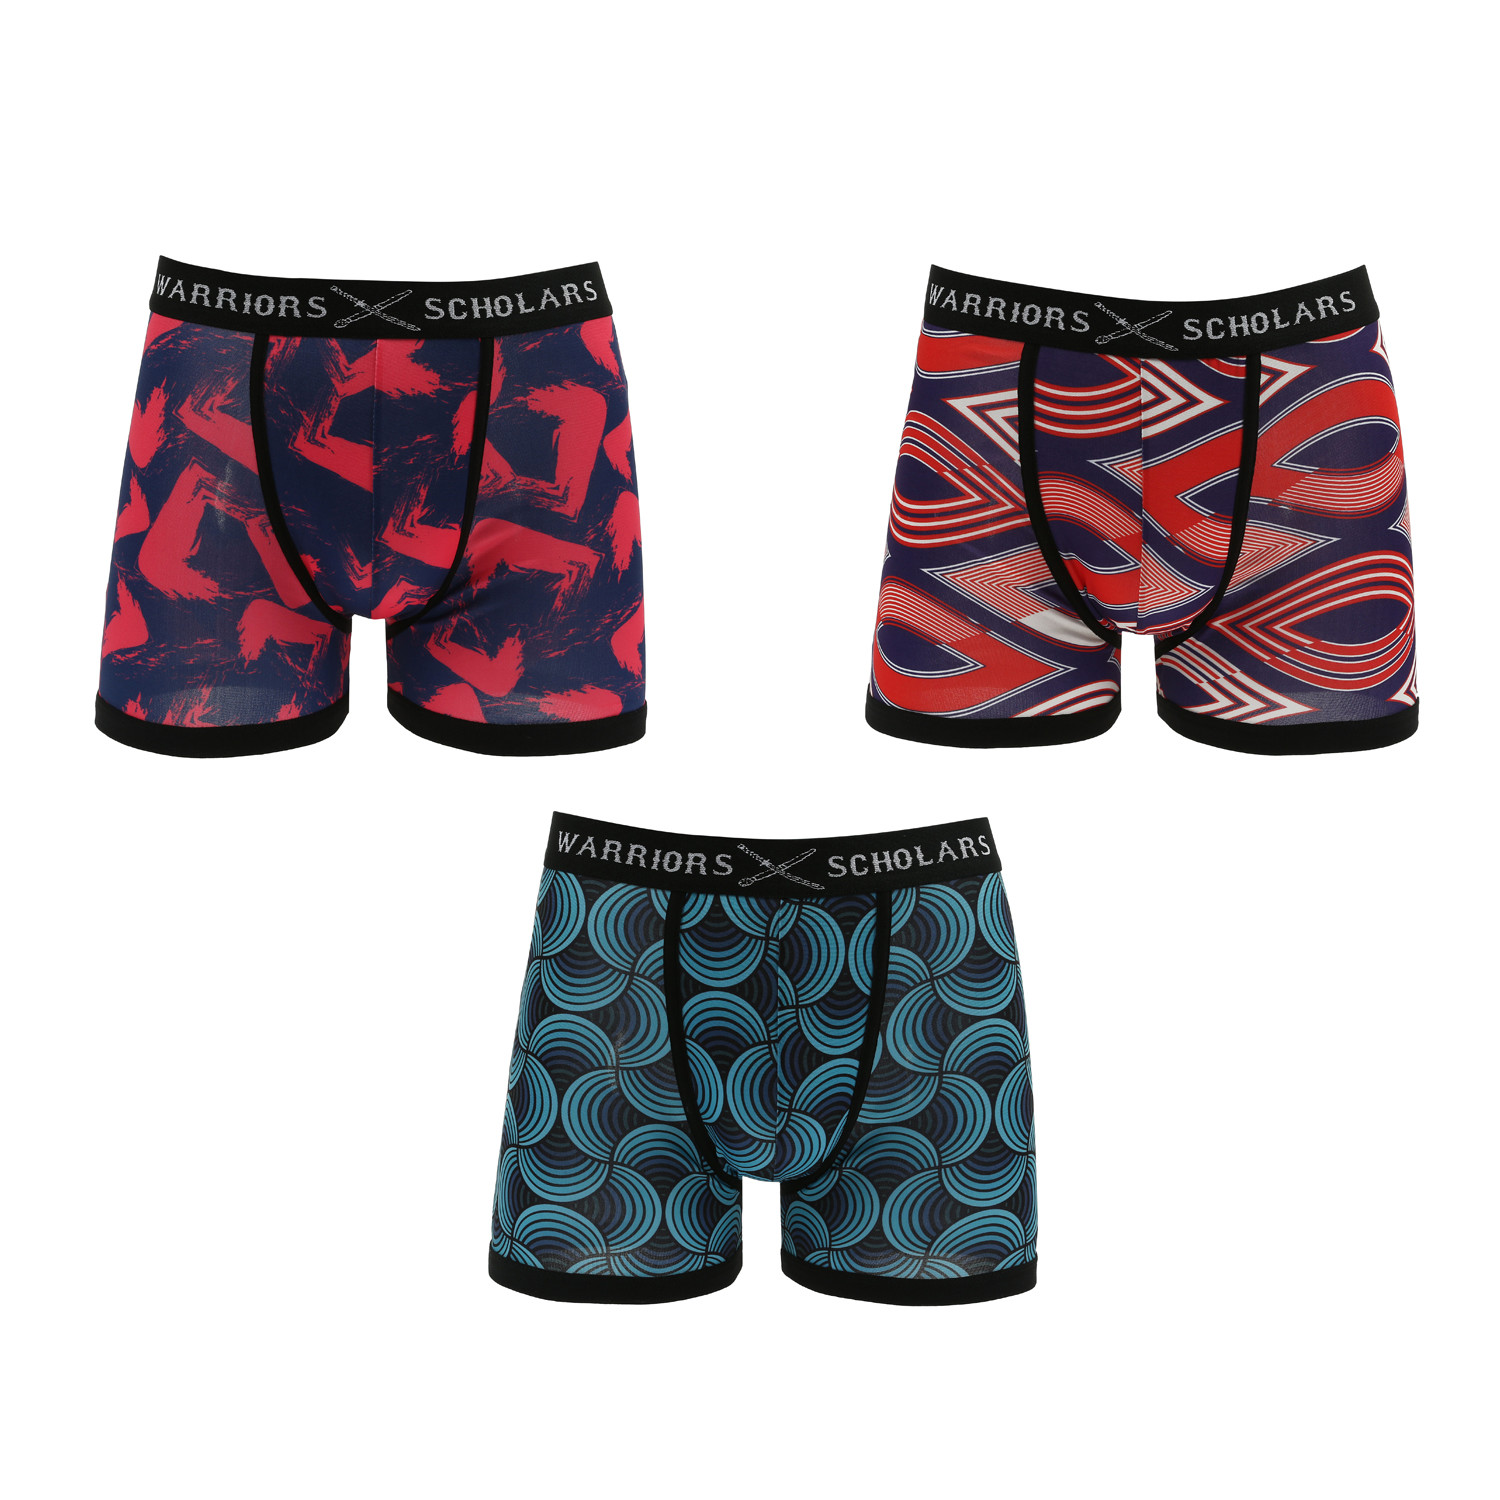 Brunswick Moisture Wicking Boxer Brief // Blue + Red // Pack of 3 (S) -  Warriors & Scholars - Touch of Modern